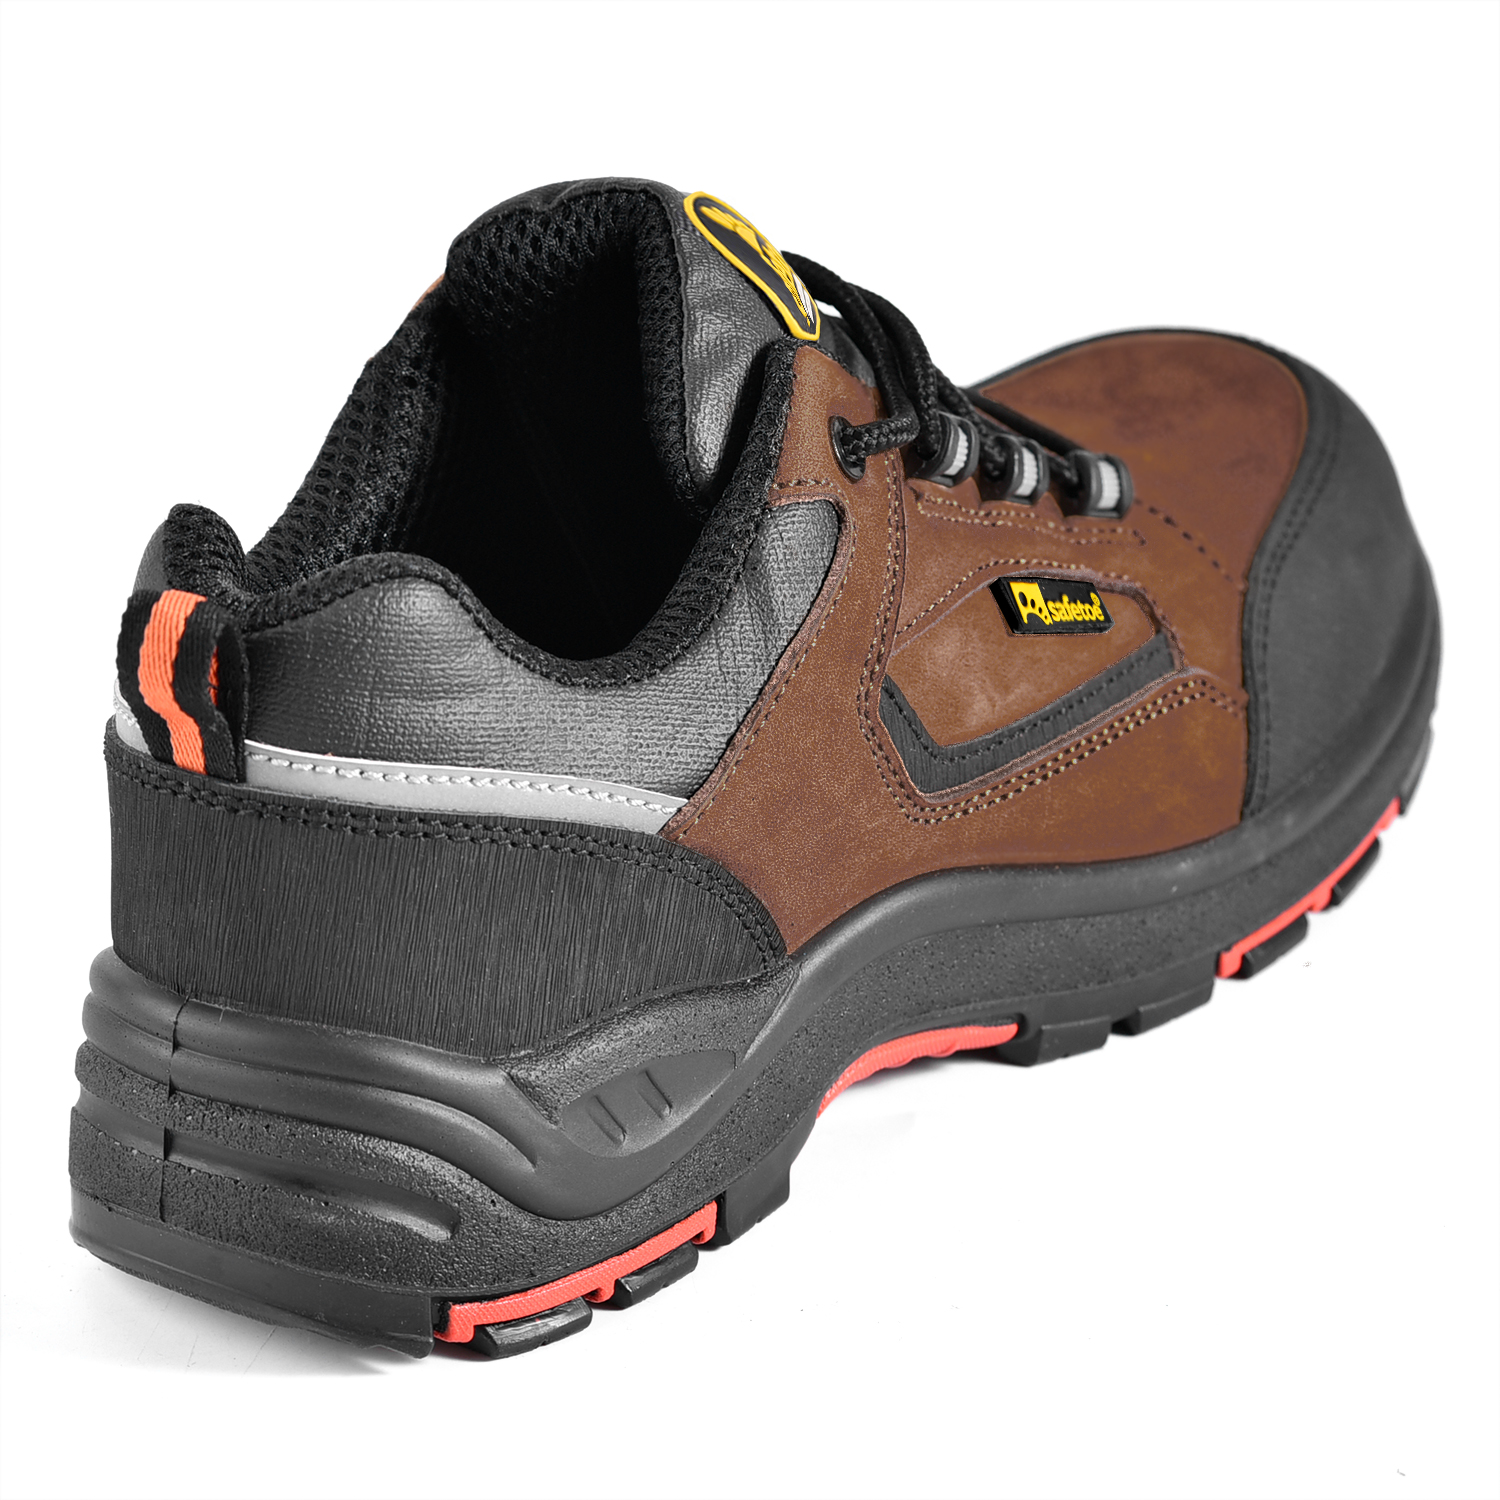 Women Composite Nubuck Leather Safety Shoes